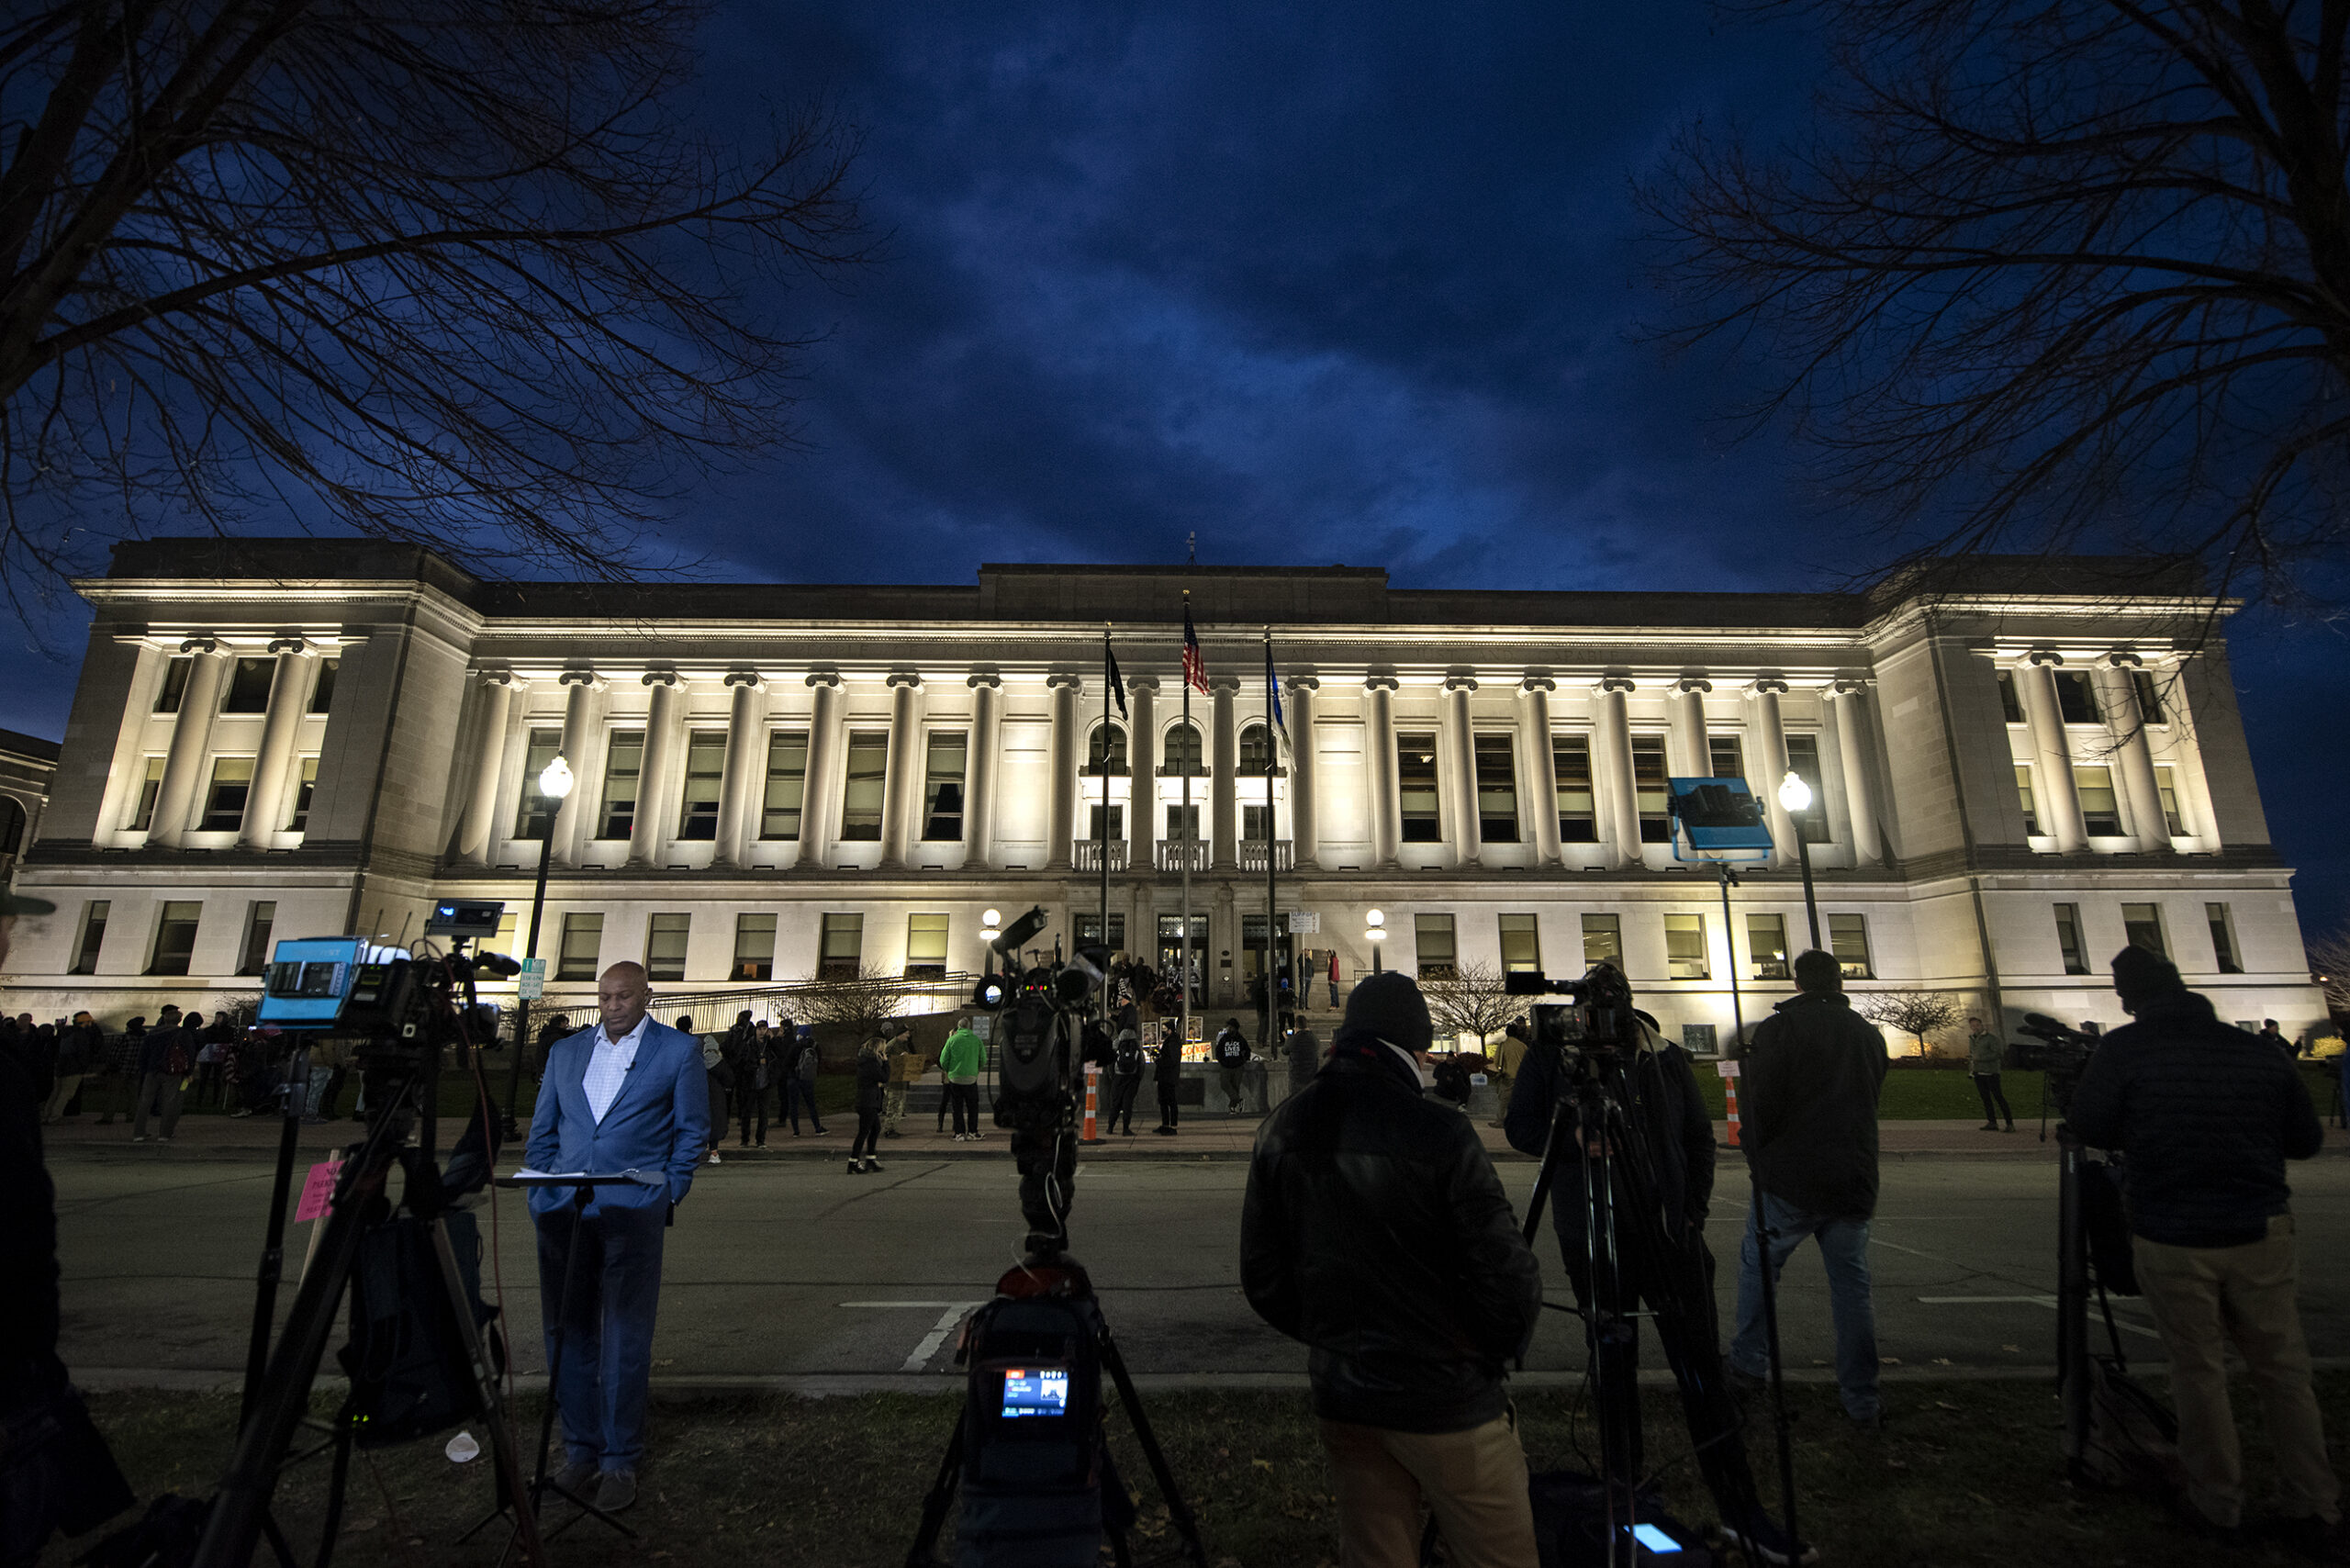 Lights illuminate the courthouse as television reporters stand in front of cameras.